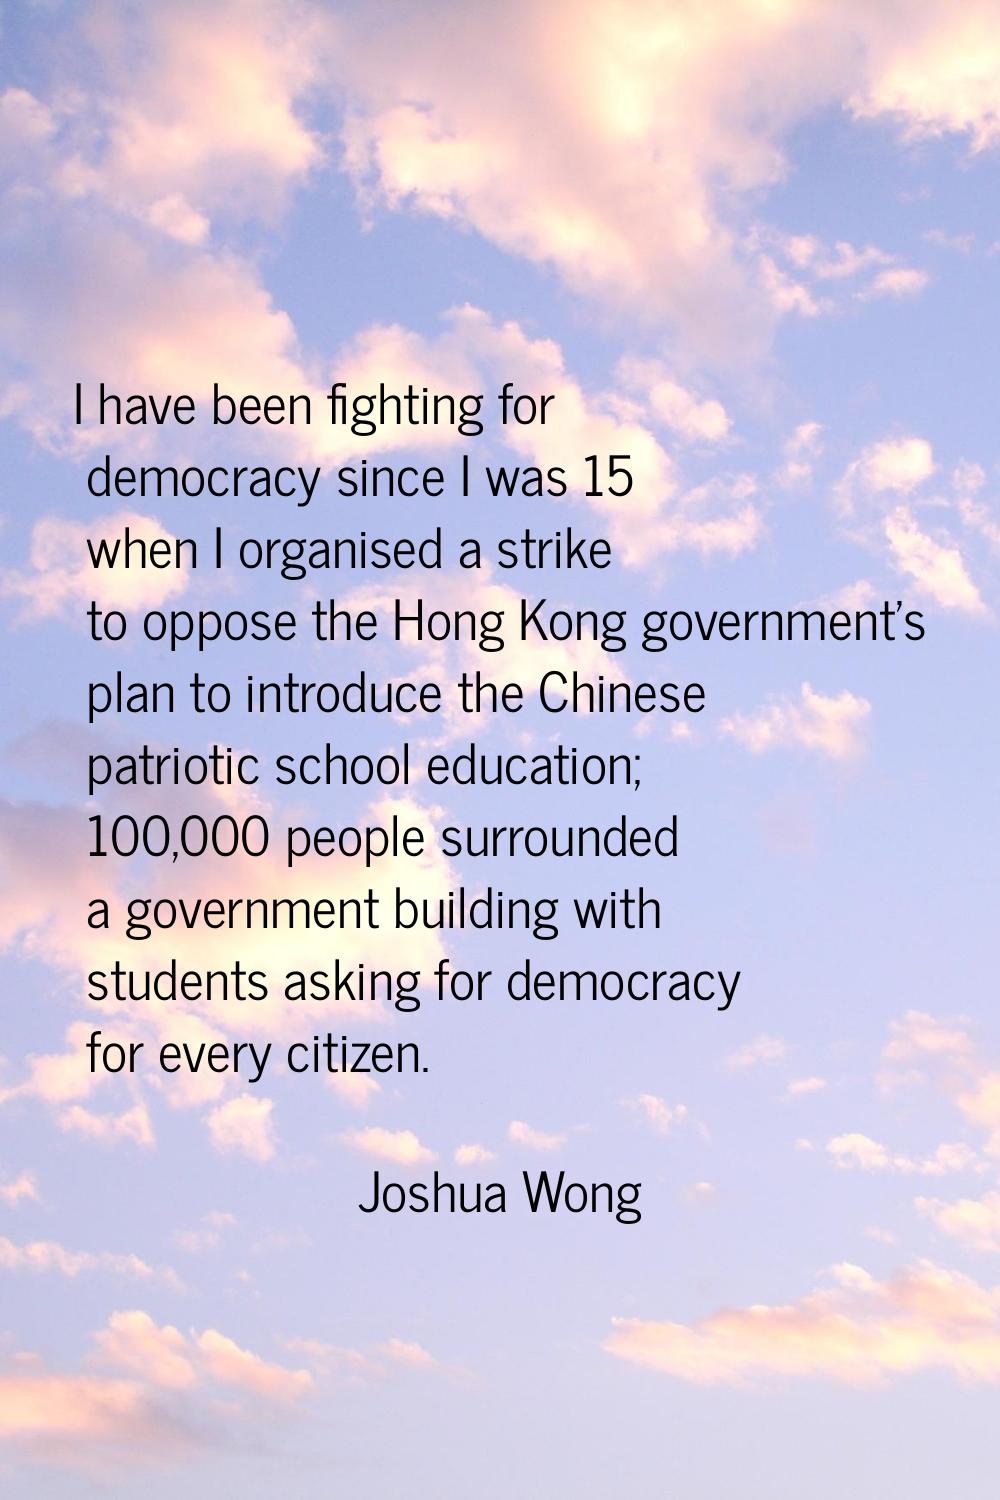 I have been fighting for democracy since I was 15 when I organised a strike to oppose the Hong Kong